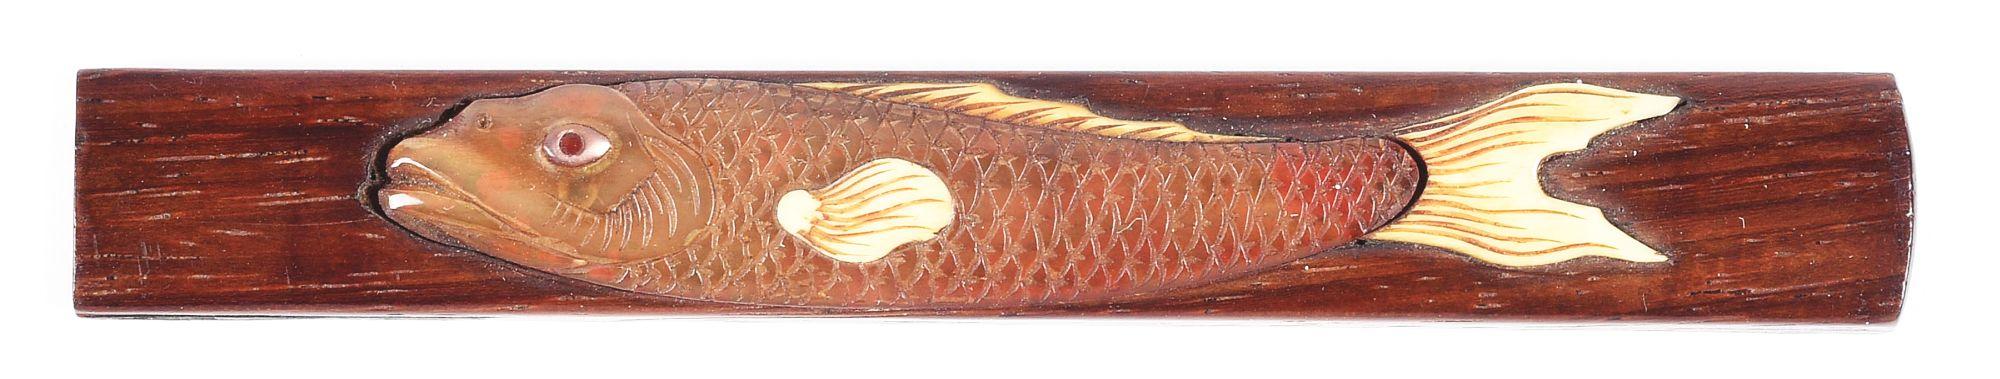 UNUSUAL WOOD HANDLED KOZUKA DEPICTING A FISH WITH MOTHER OF PEARL AND IVORY ACCENTS.